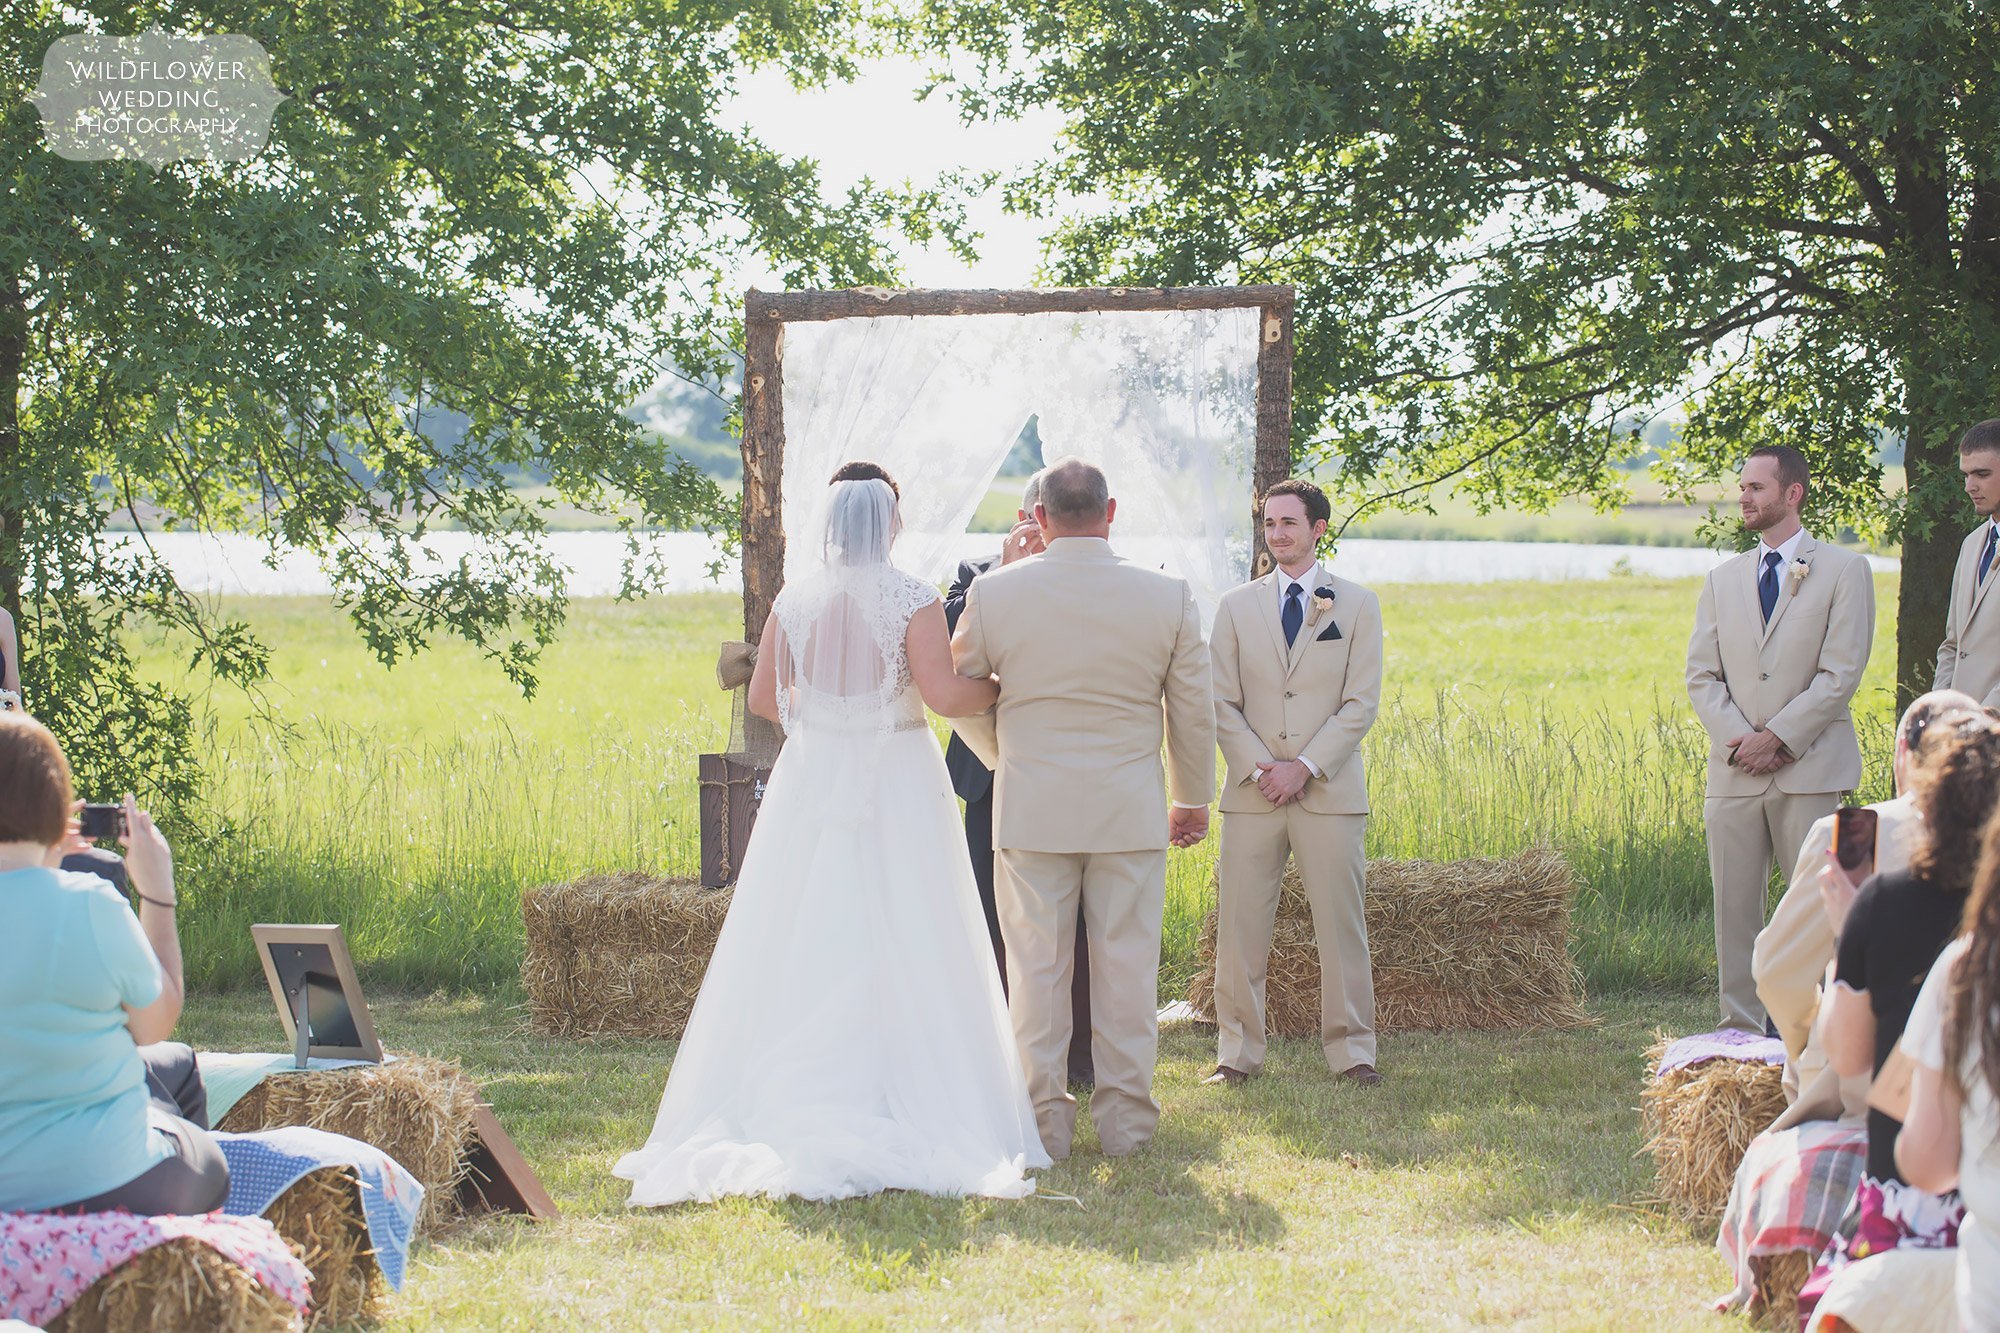 This rustic and country outdoor wedding ceremony in a field at the Bradford Farm is beautiful.